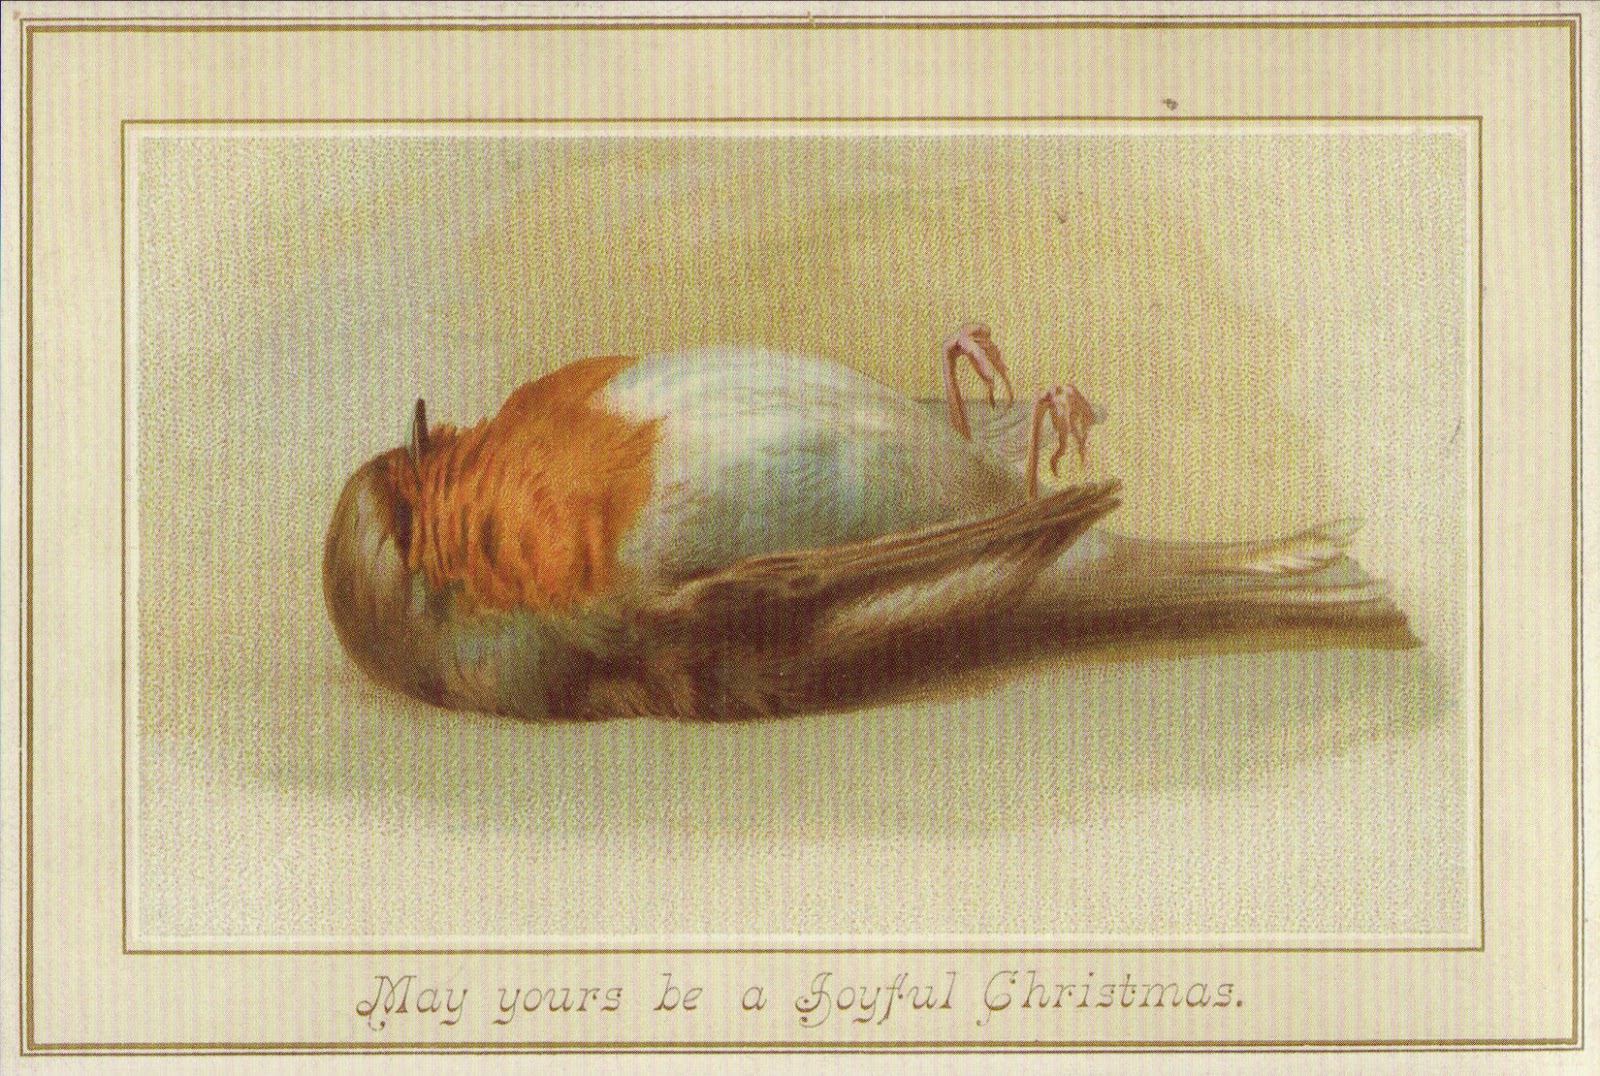 Beautifully Drawn Dead Birds Was Quite Popular In The Late 1800s  Wth